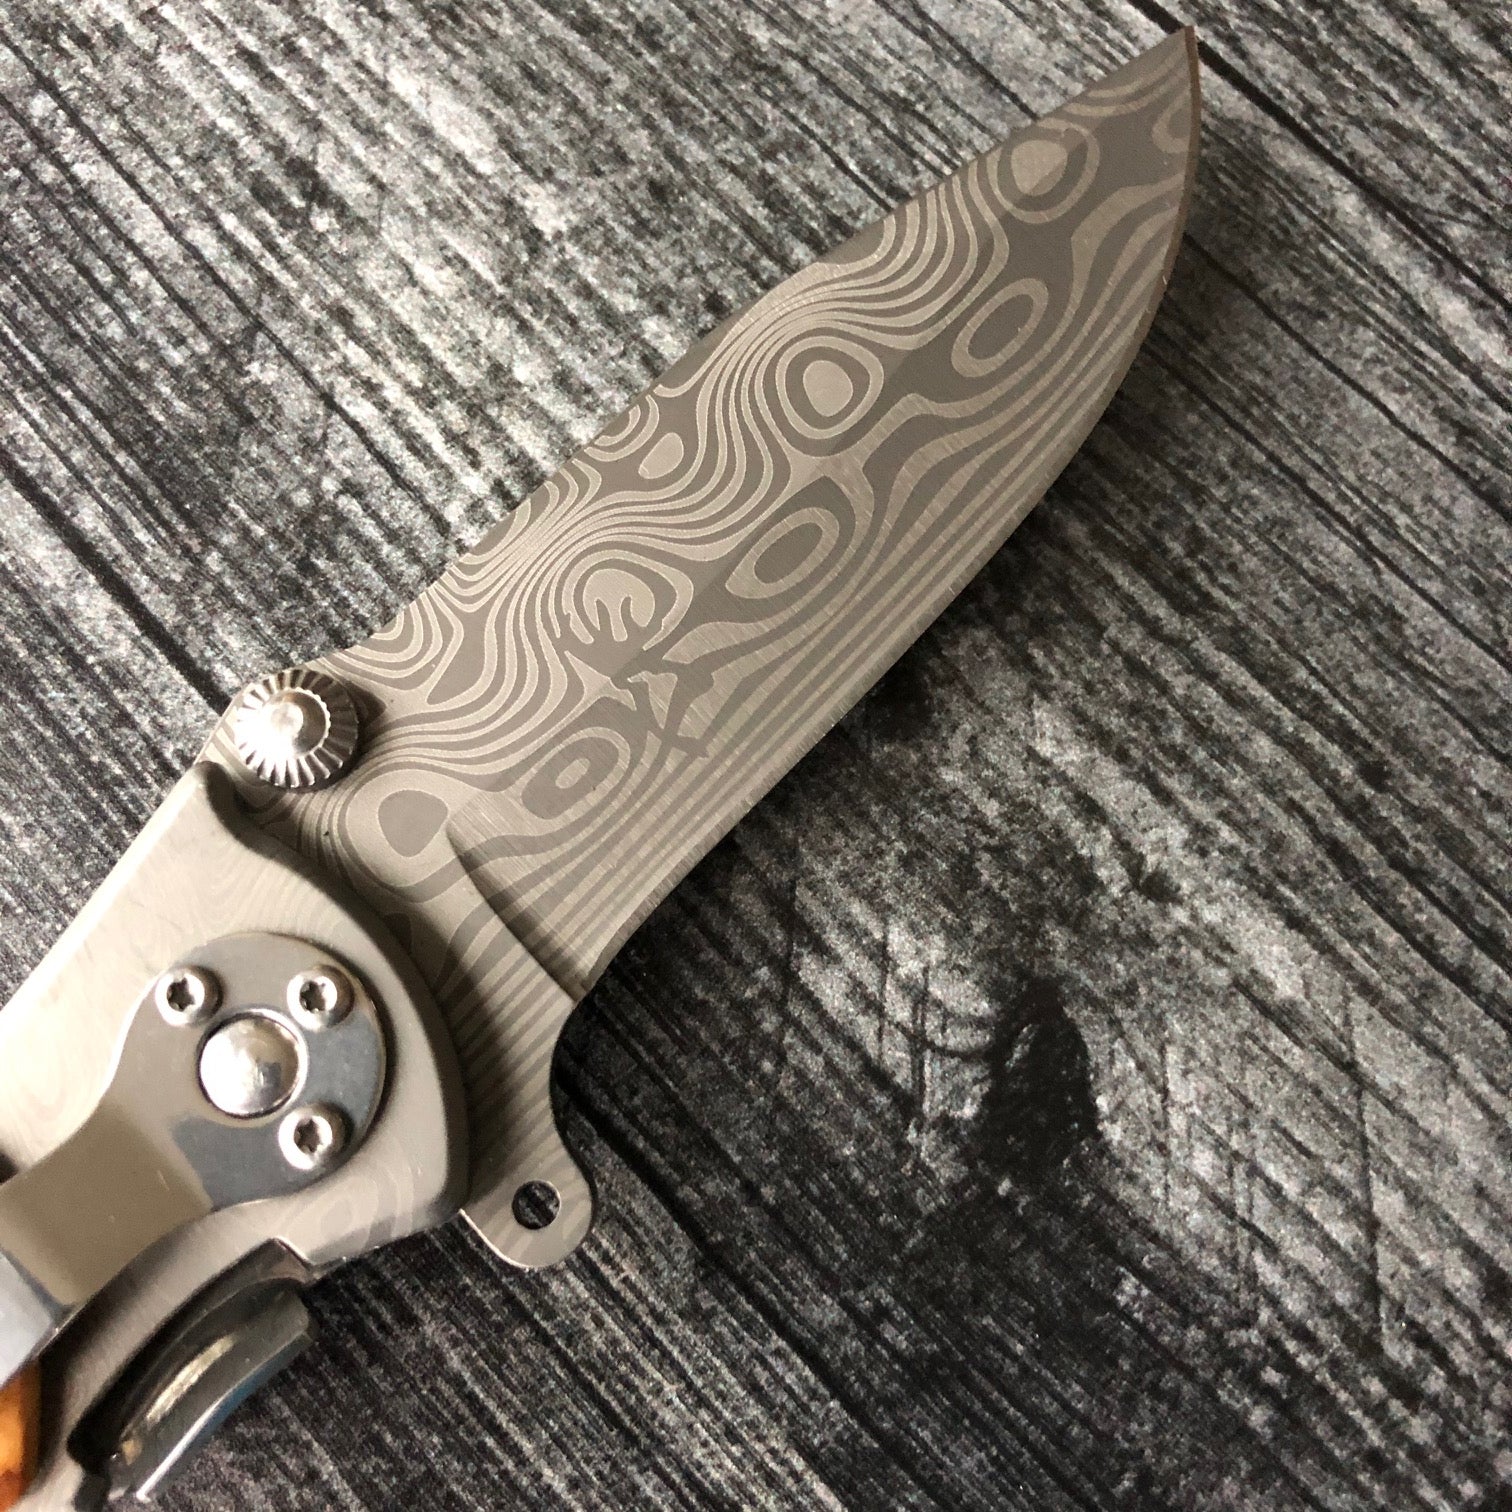 Beautiful Damascus Steel Blade - Groovy Guy Gifts